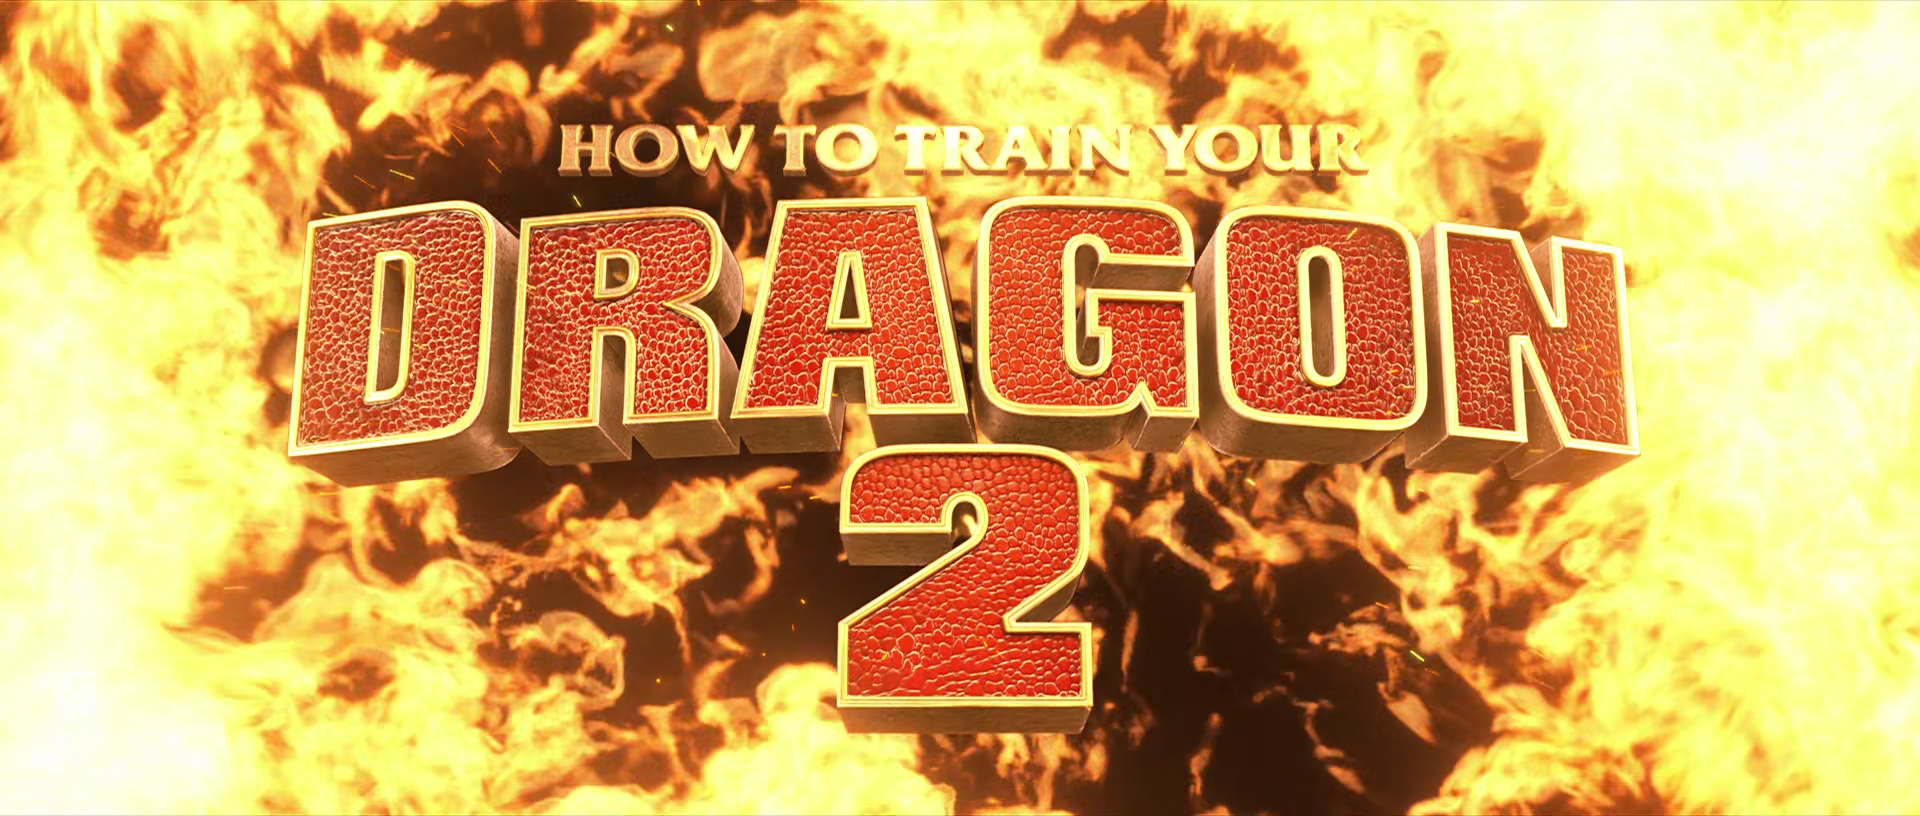 into film school tickets how to train your dragon